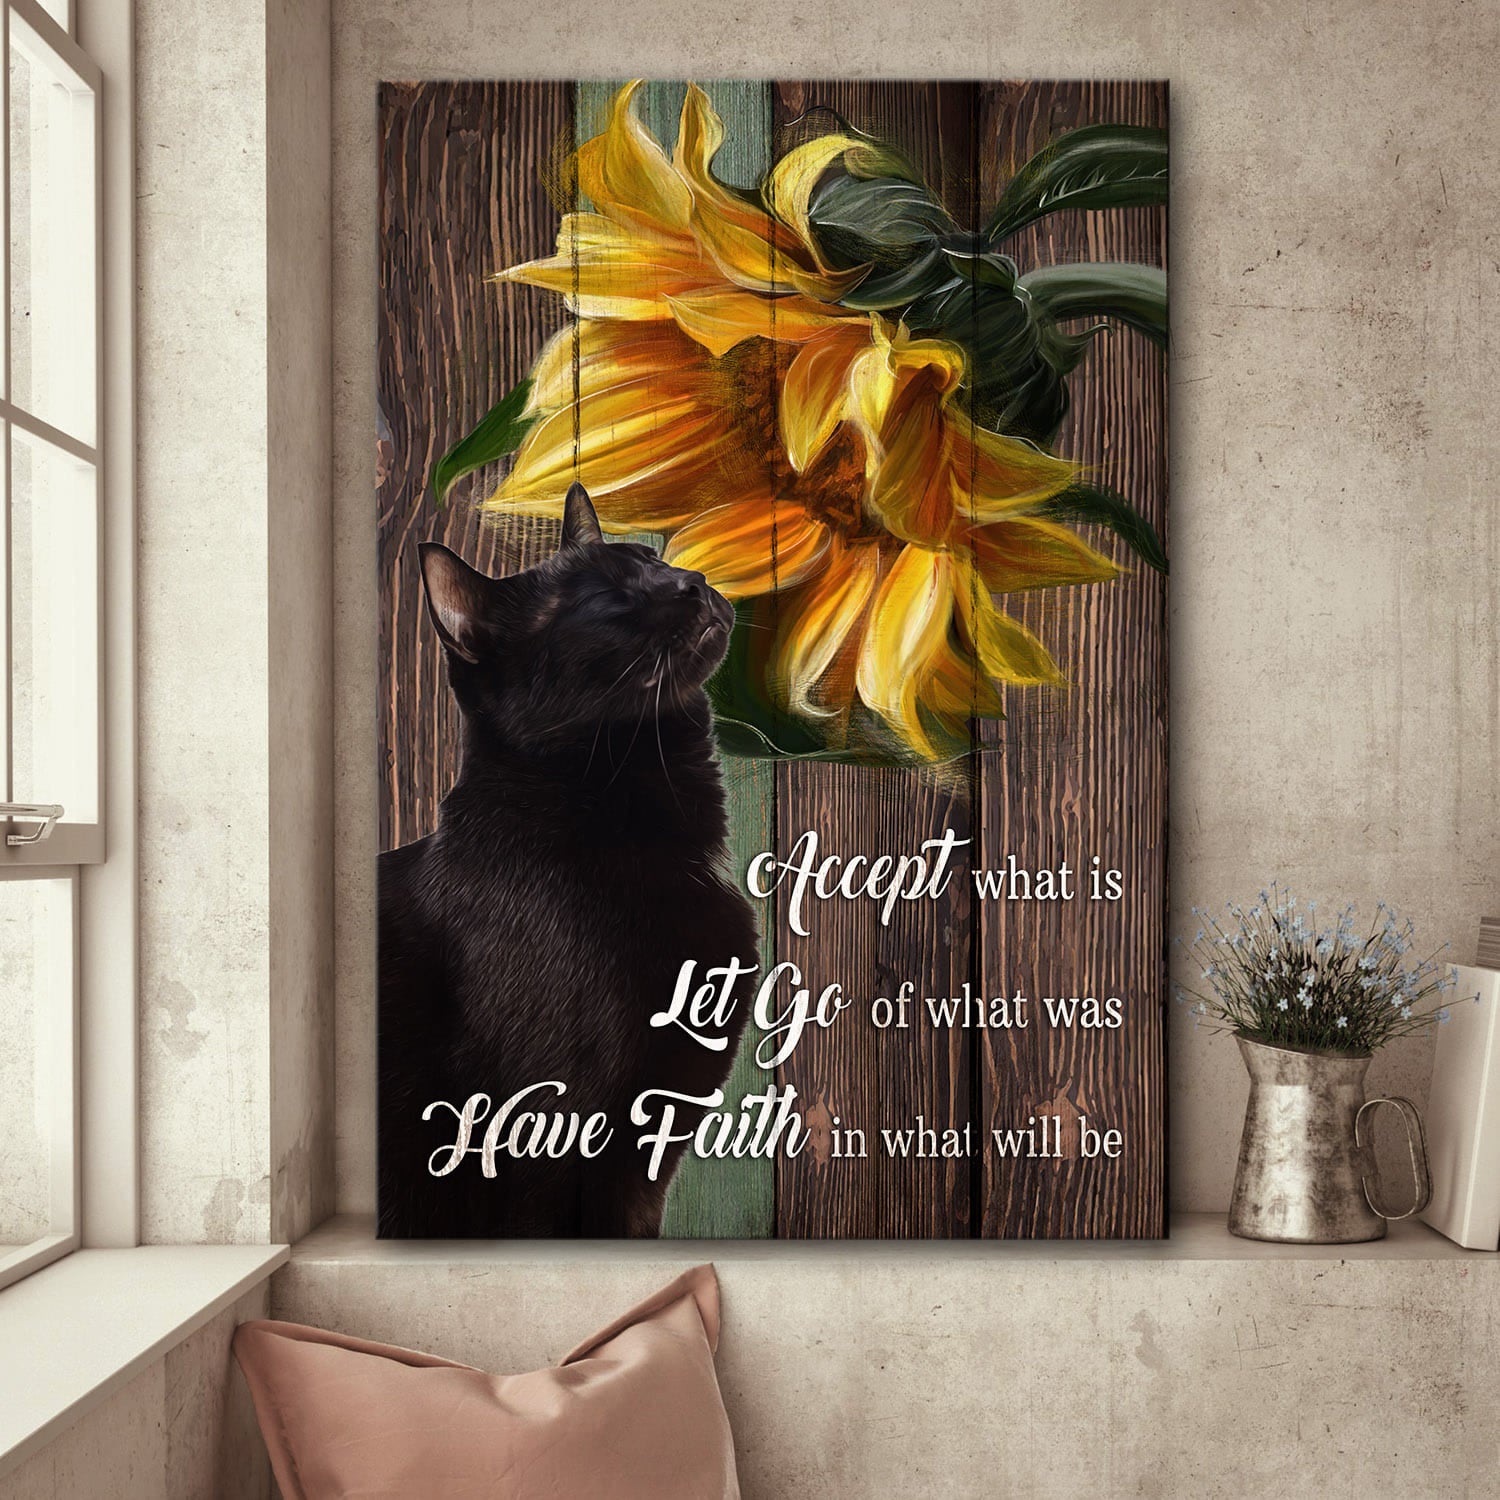 Black cat, Sunflower, Accept what is, have faith in what will be - Black cat Portrait Canvas Prints, Wall Art